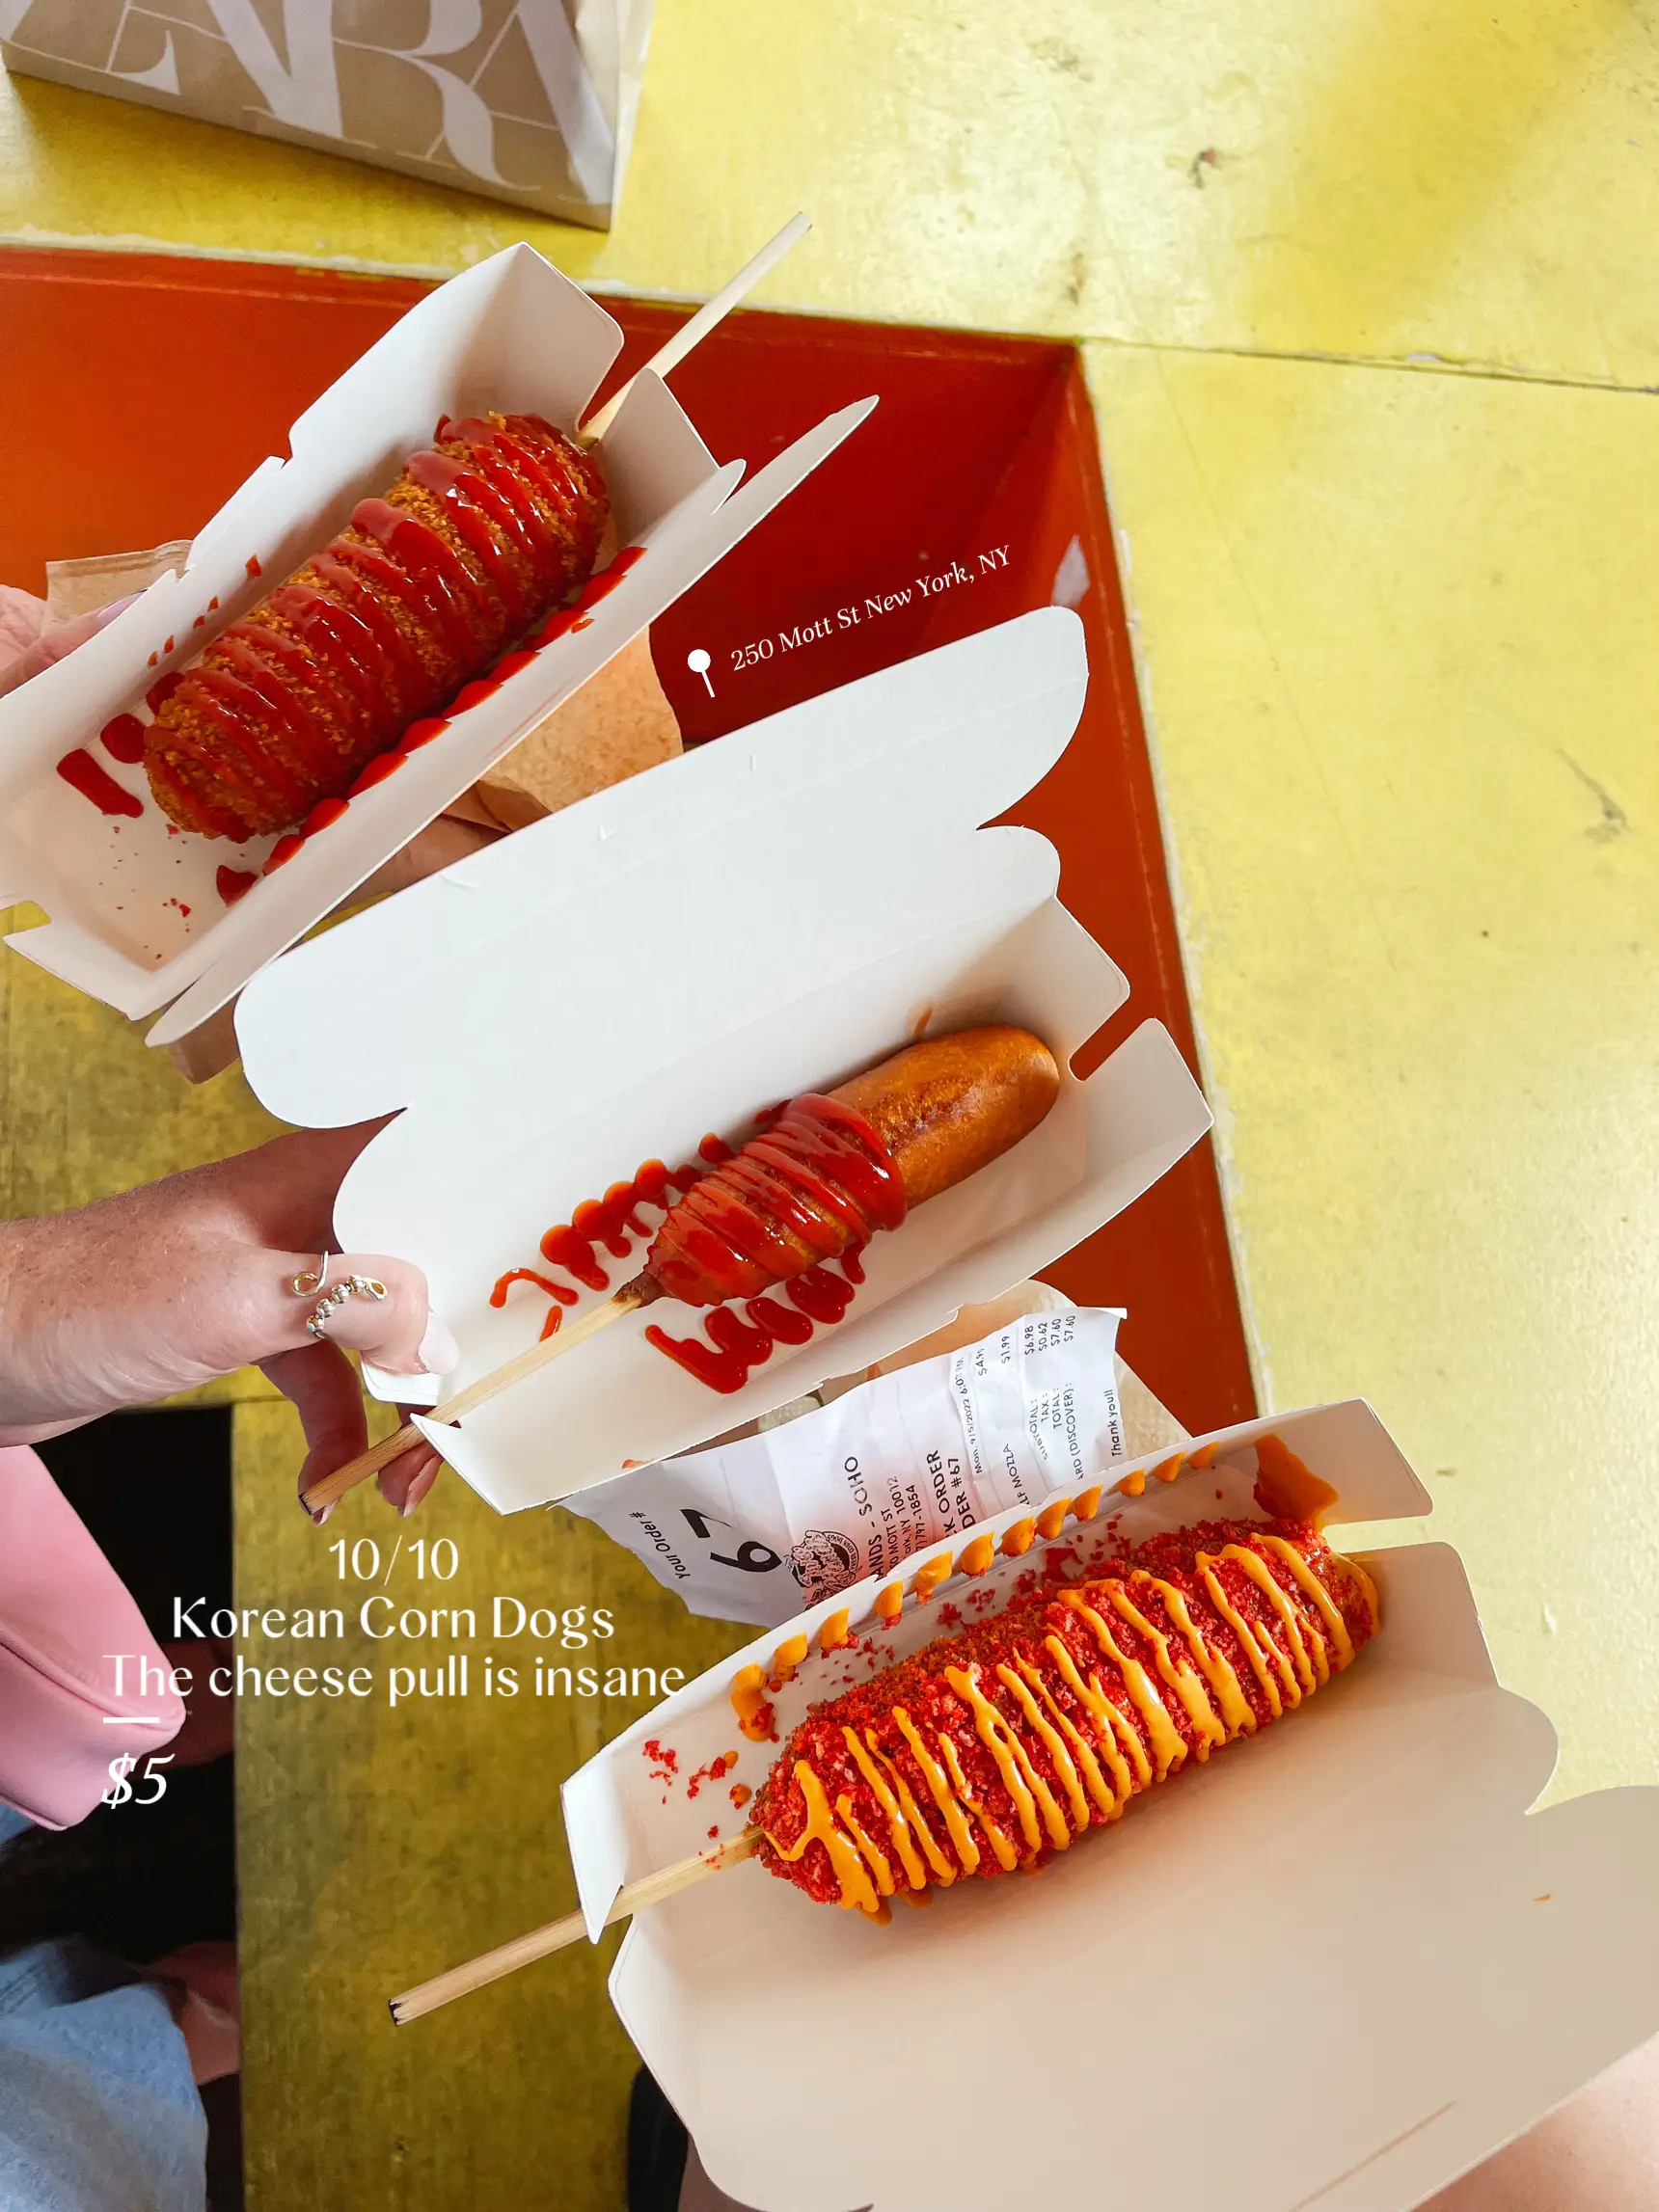  A box of Korean corn dogs with a $5 price tag.